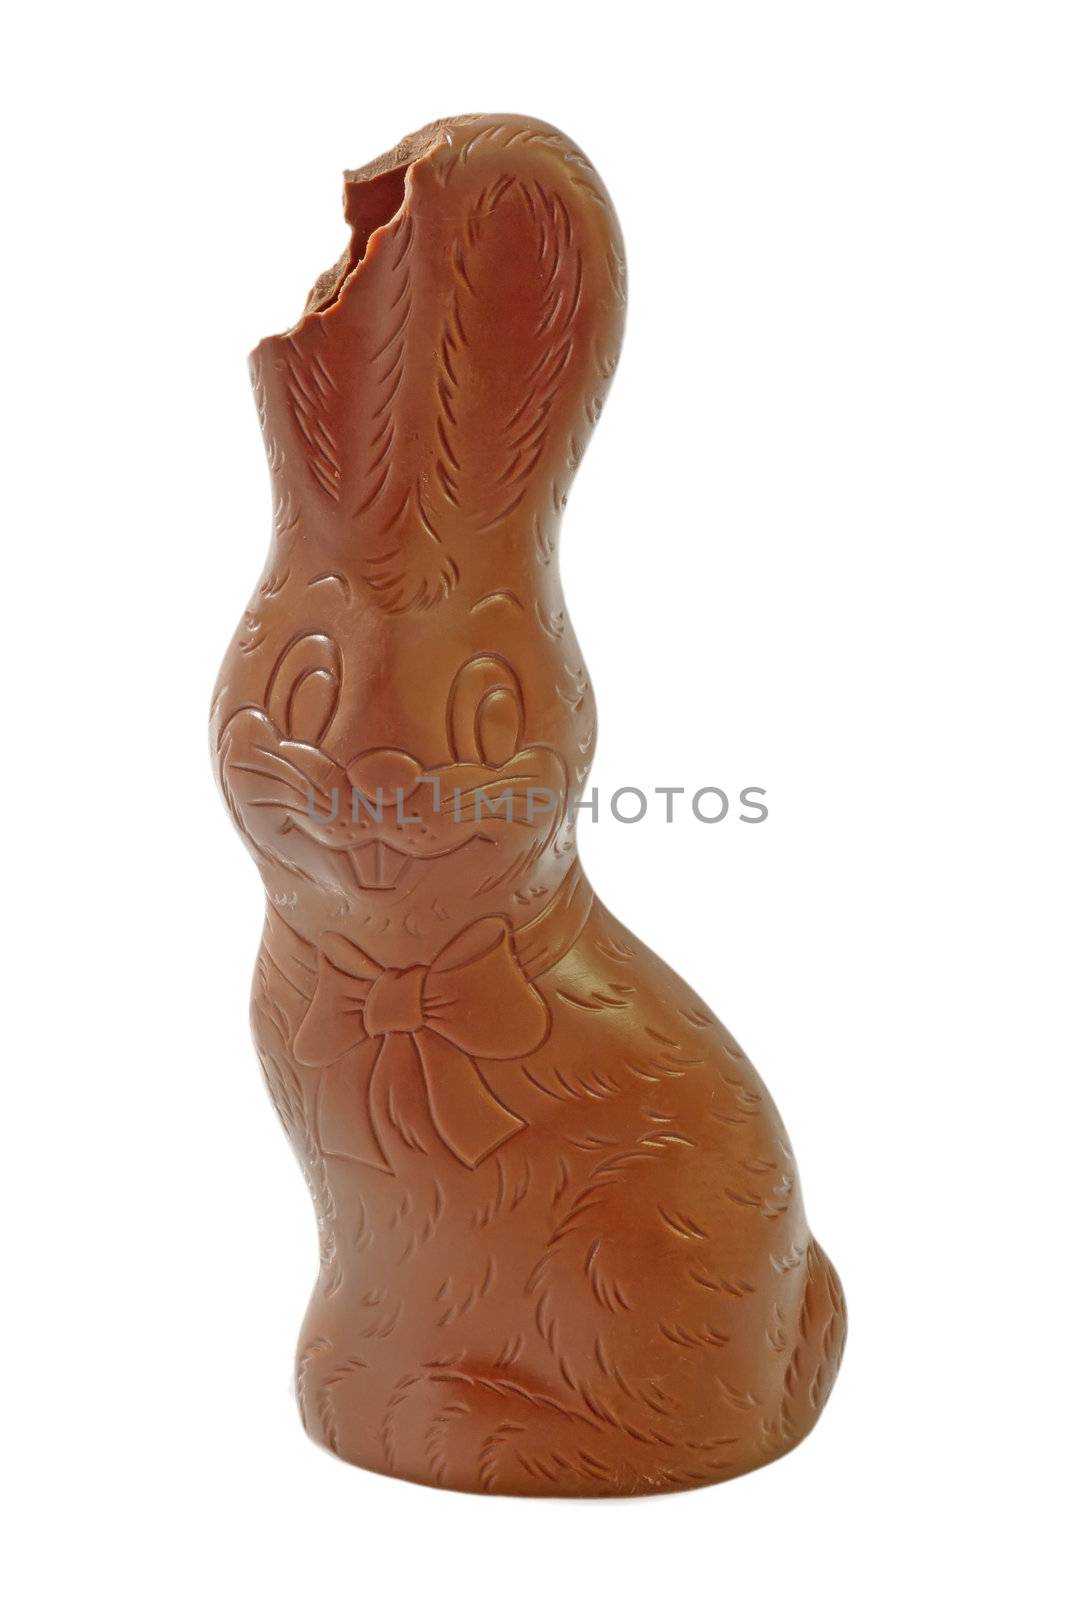 Chocolate Easter Bunny. Traditional Easter sweet.
